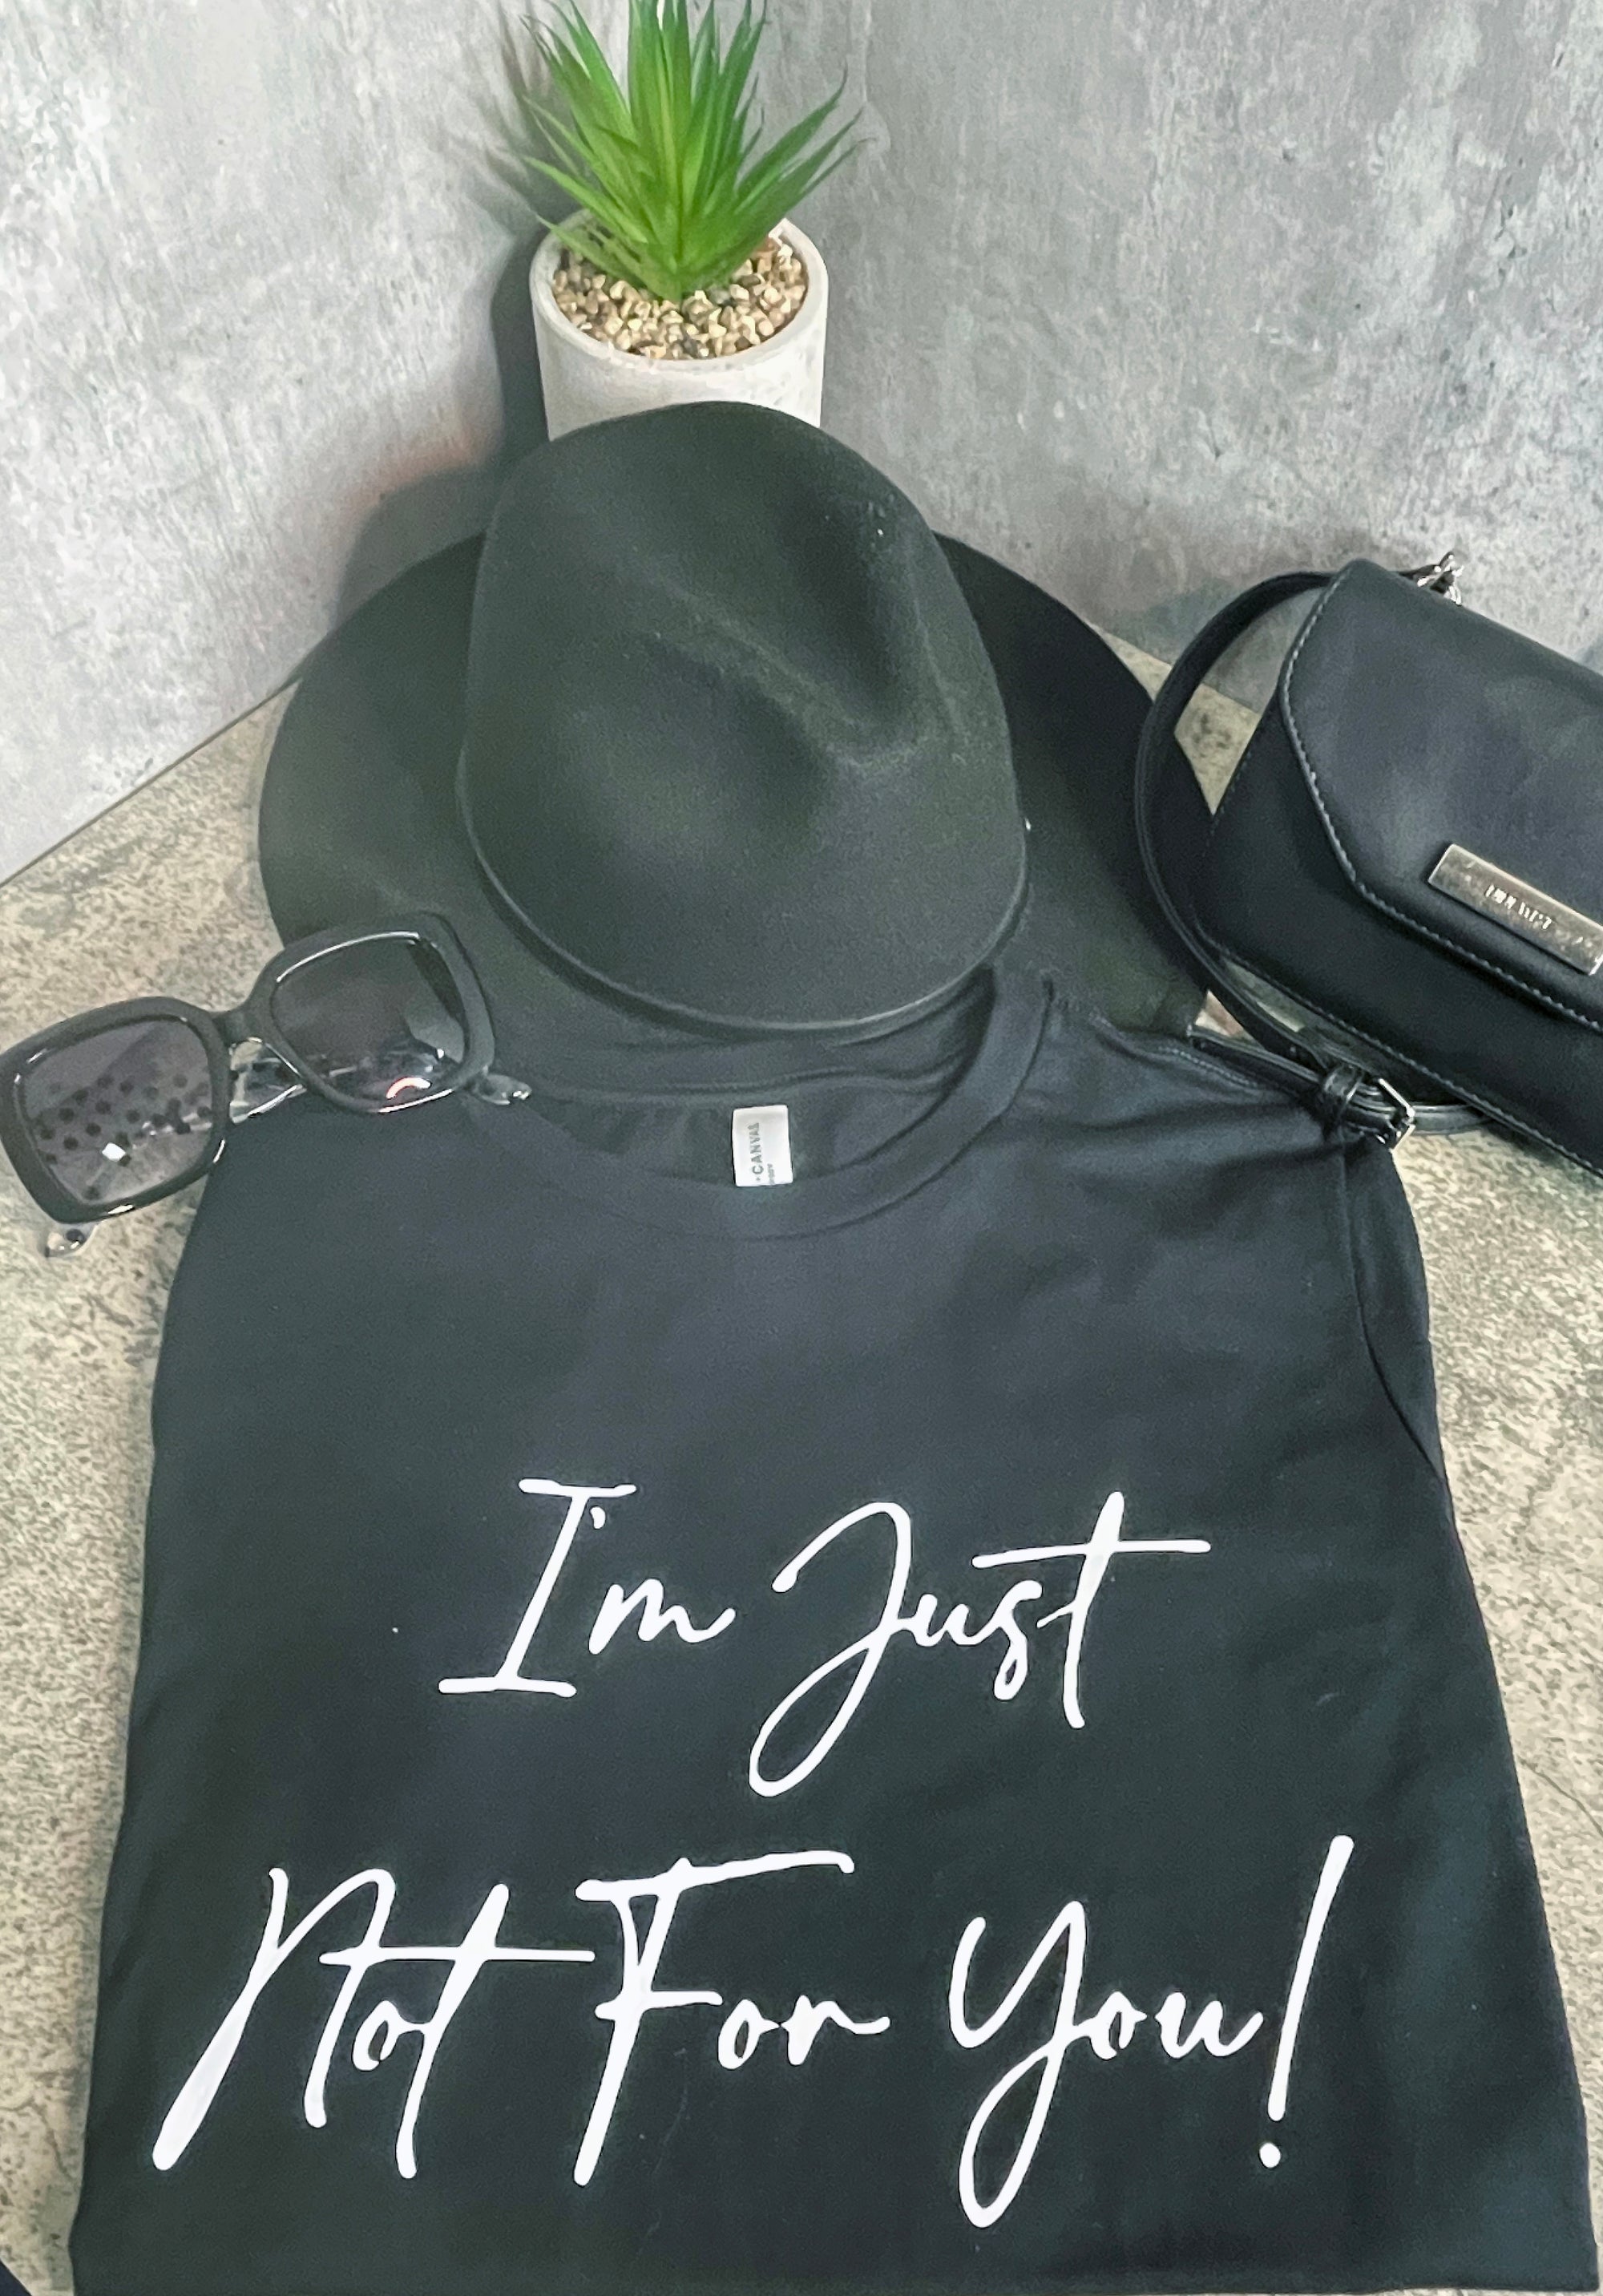 I'm just not for you (short sleeve shirt)